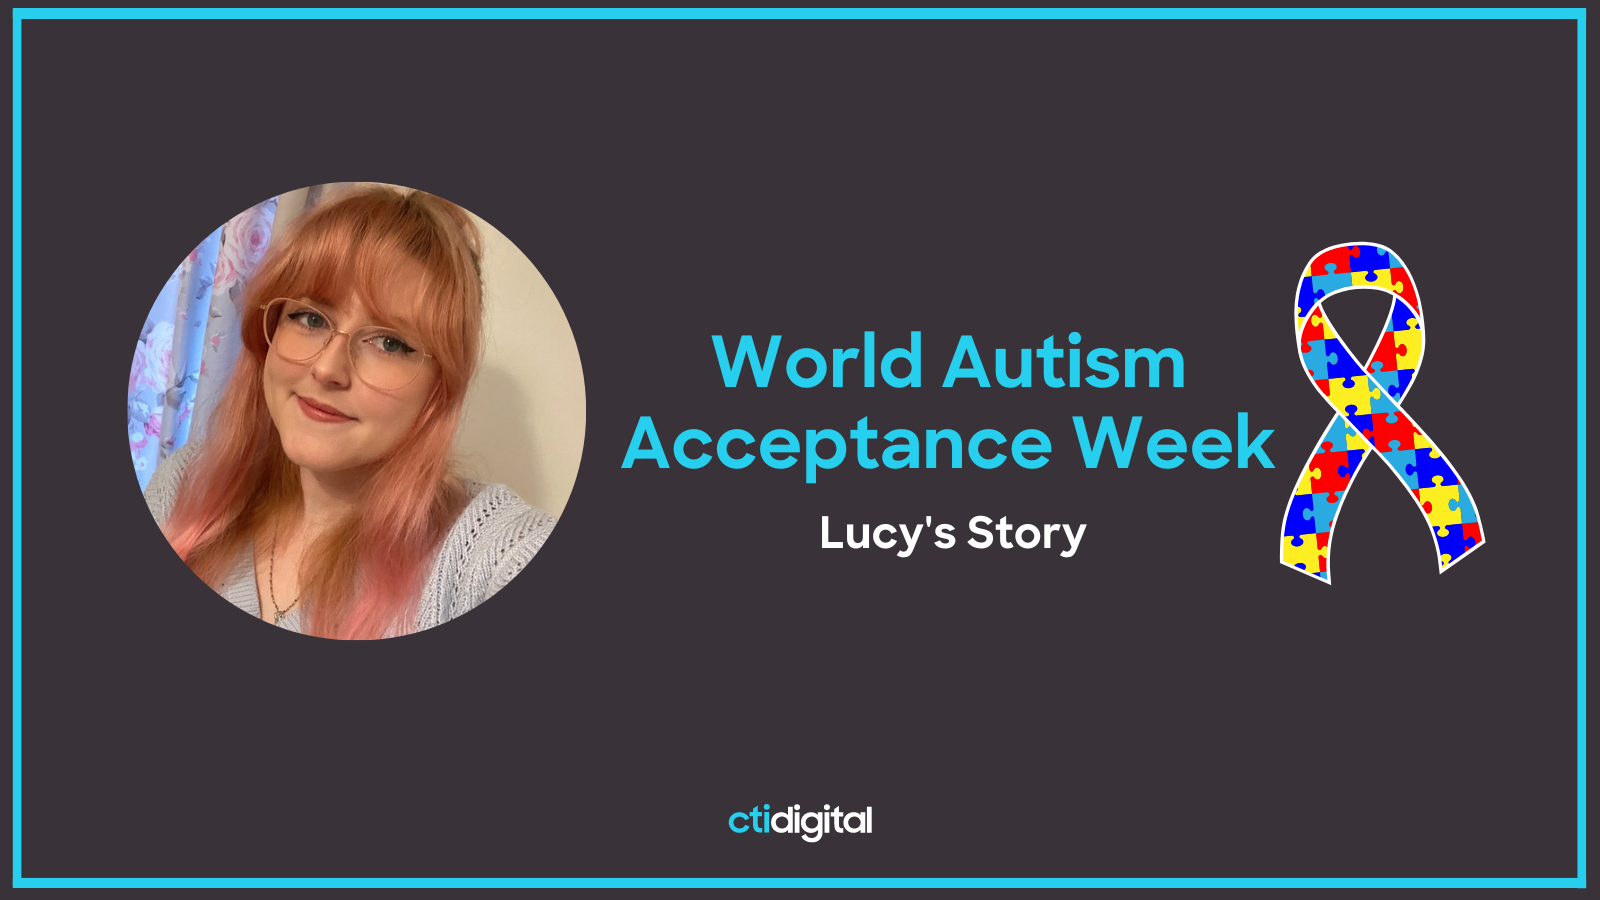 World Autism Acceptance Week: Lucy’s Story